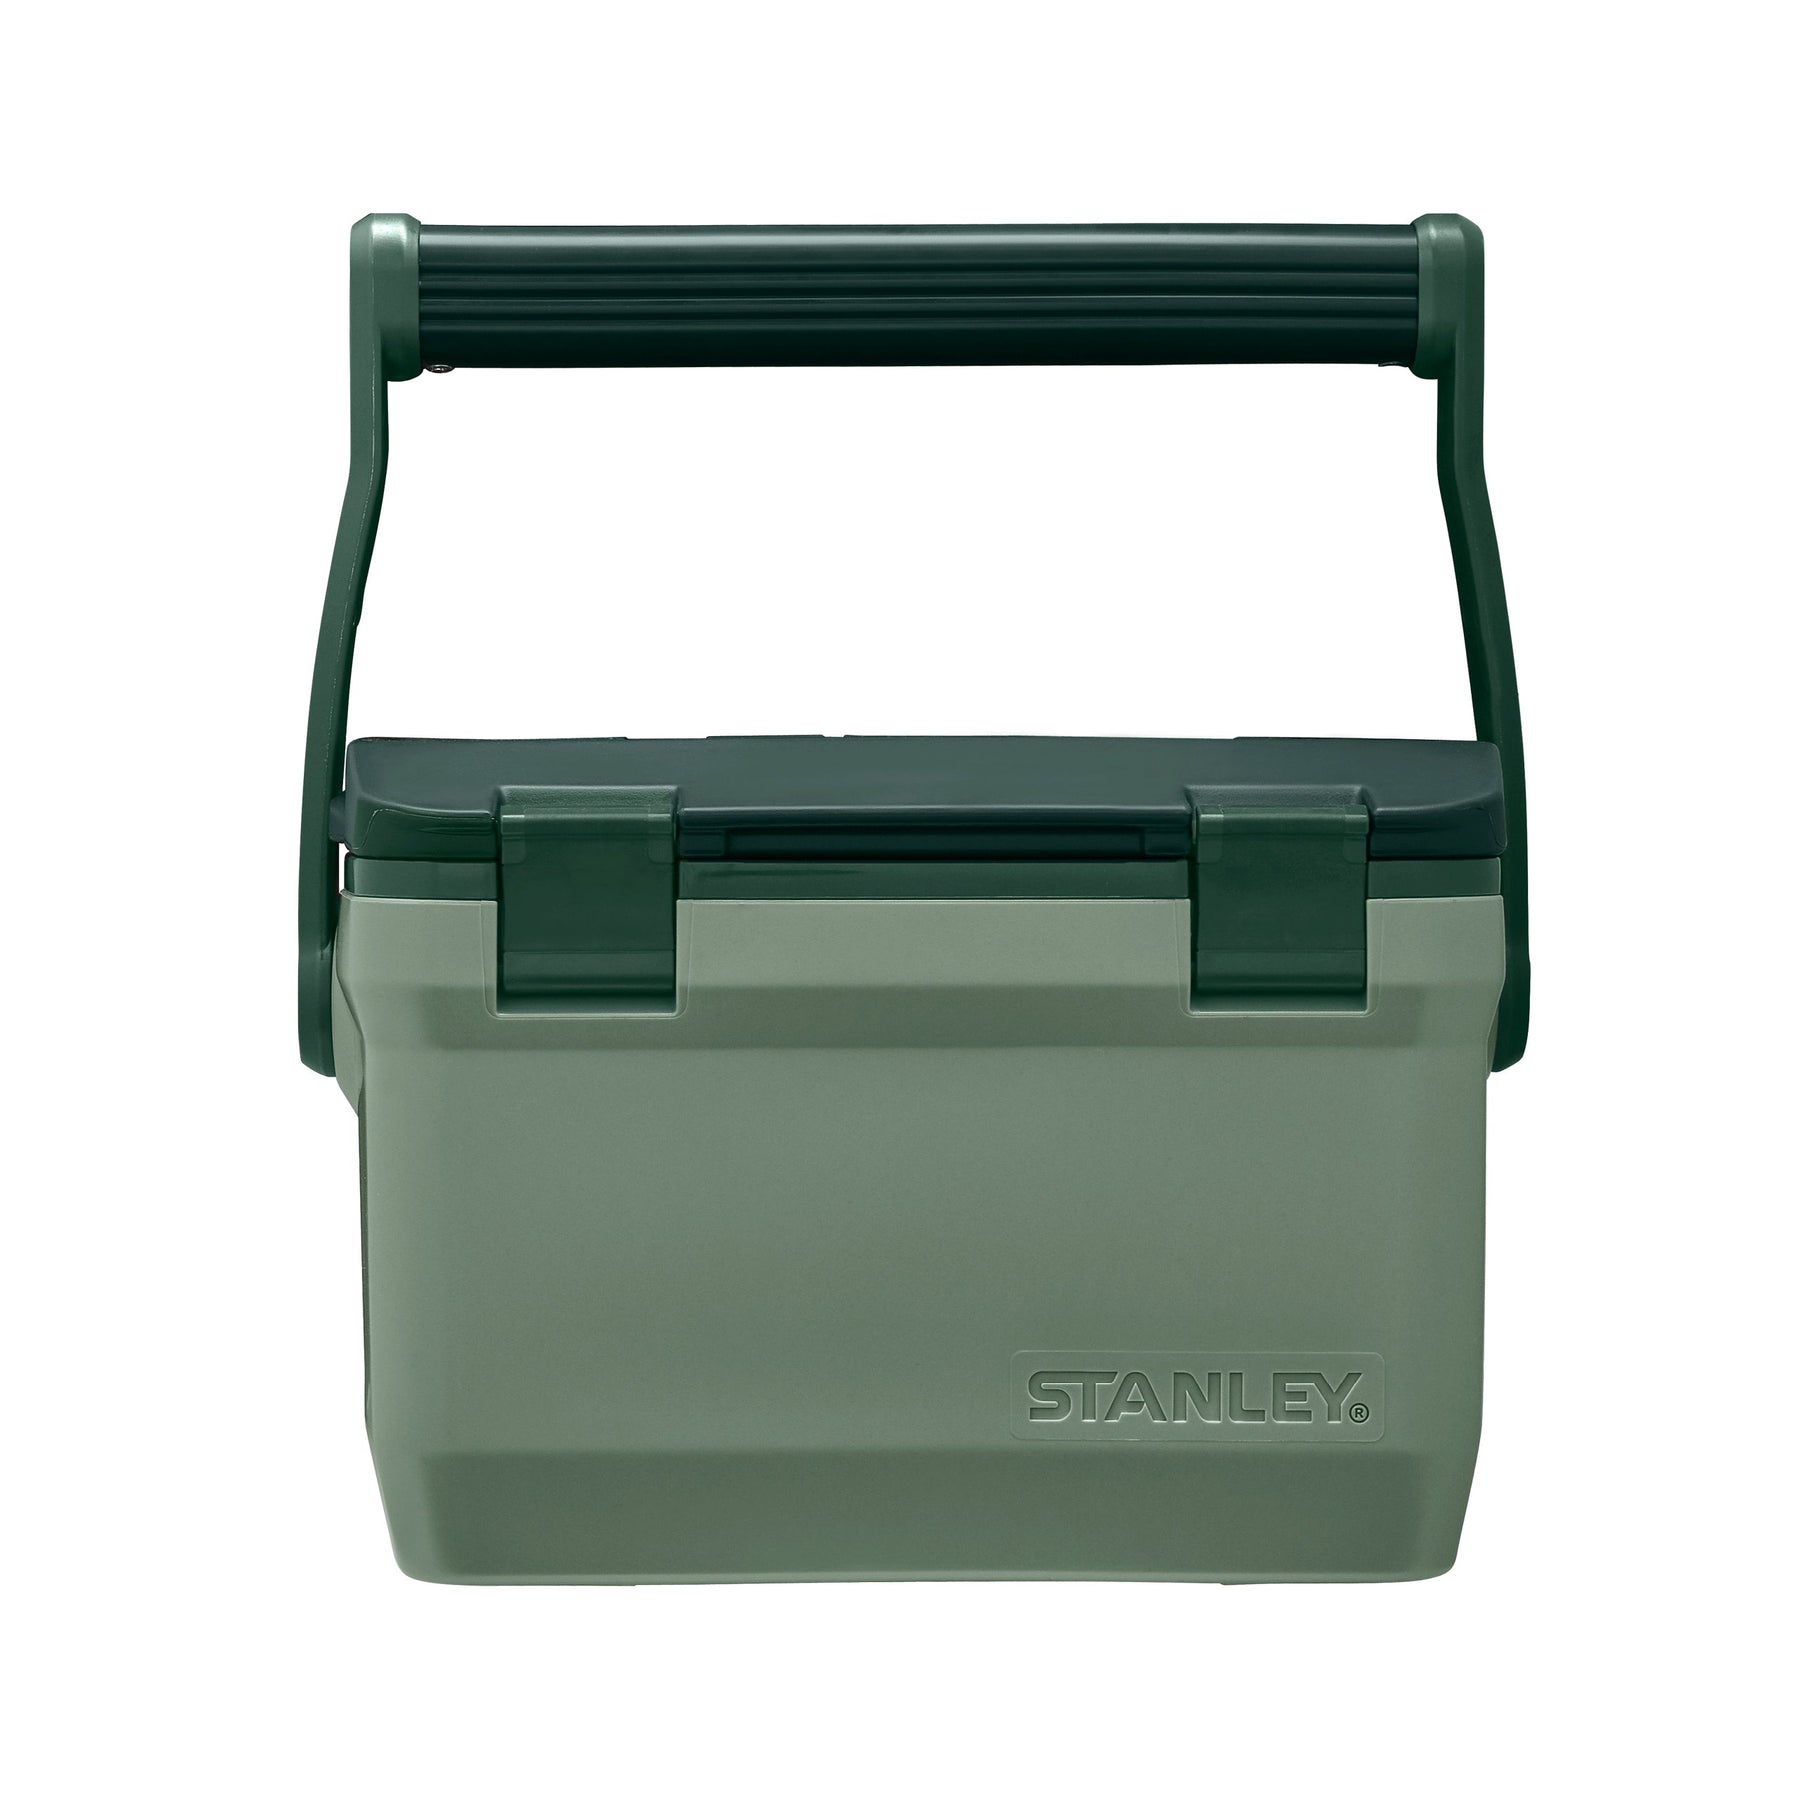 https://cdn.shopify.com/s/files/1/0516/4564/5000/products/TheEasy-CarryOutdoorCooler6.6L-Green-FrontView_1800x1800.jpg?v=1699055813